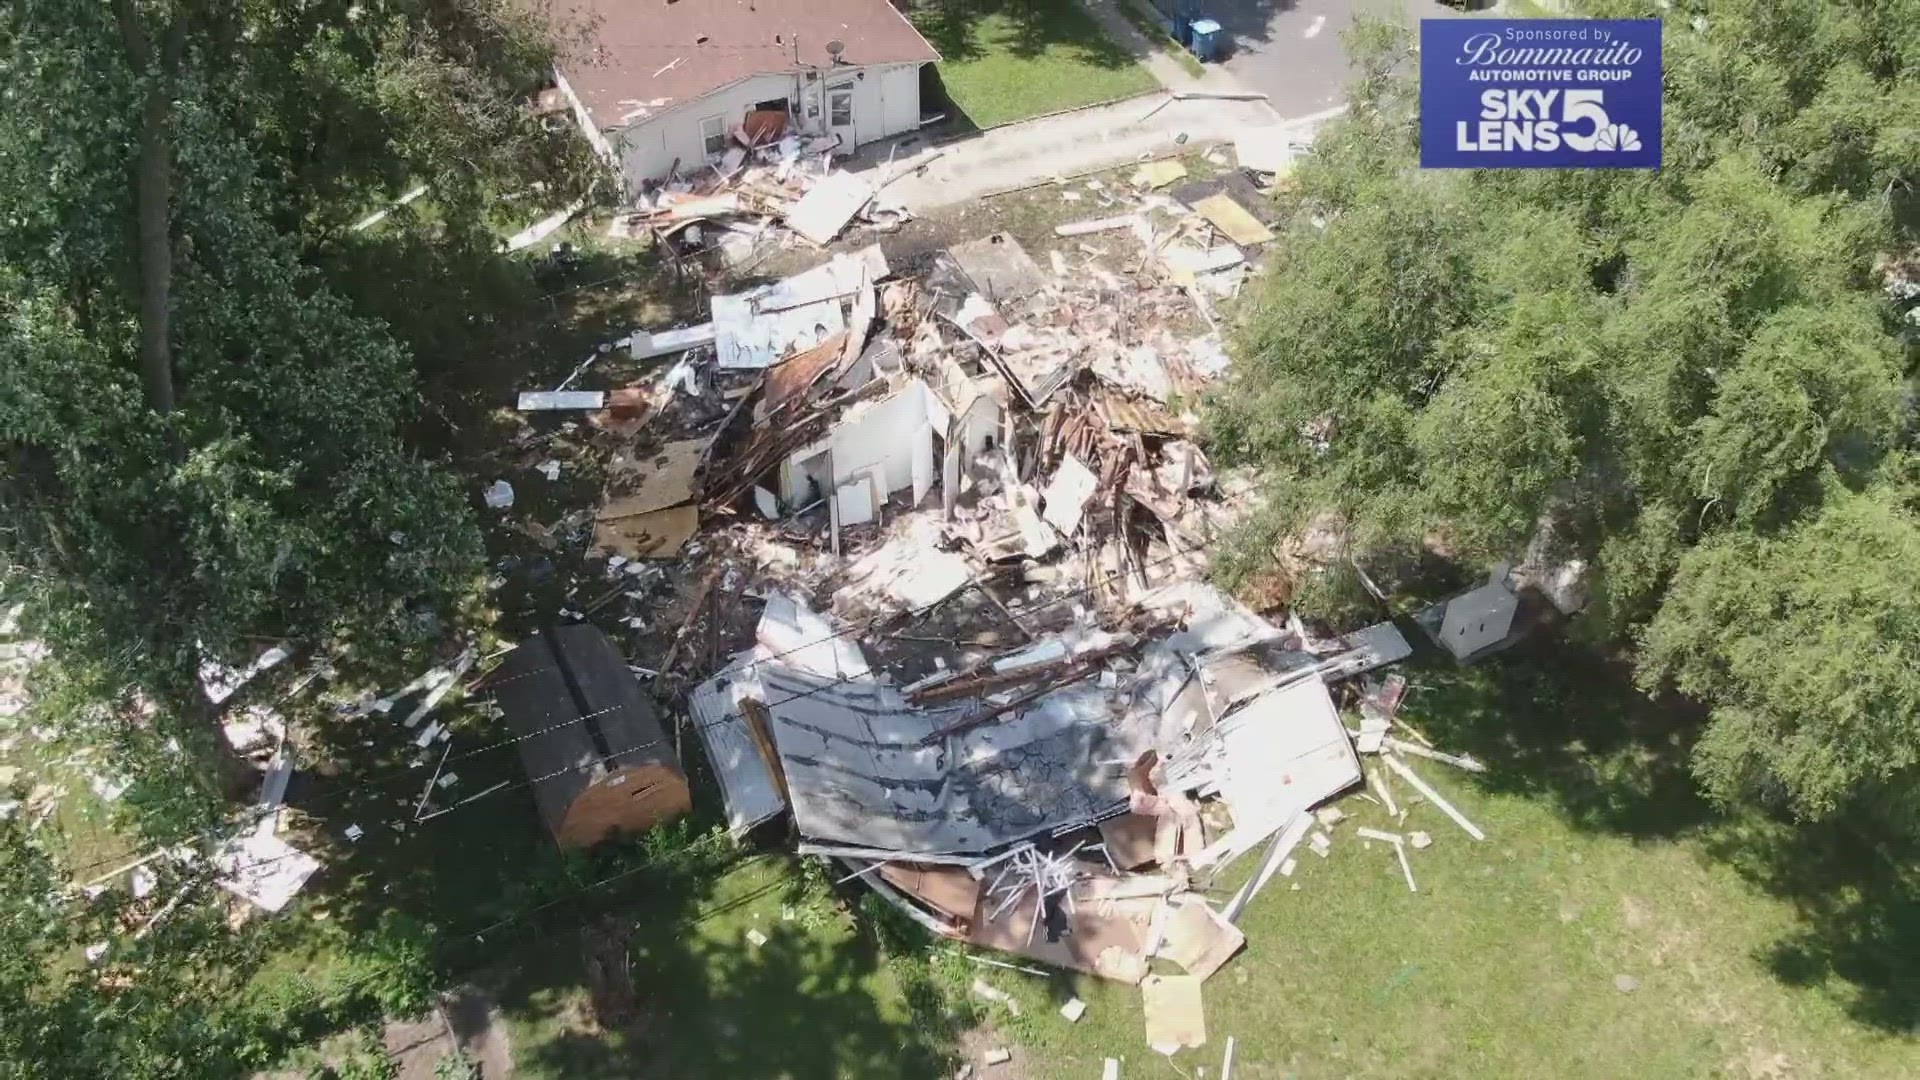 No one was injured in an explosion that destroyed a home in Granite City early Monday morning. 
Investigators believe a faulty water heater may have been the cause.